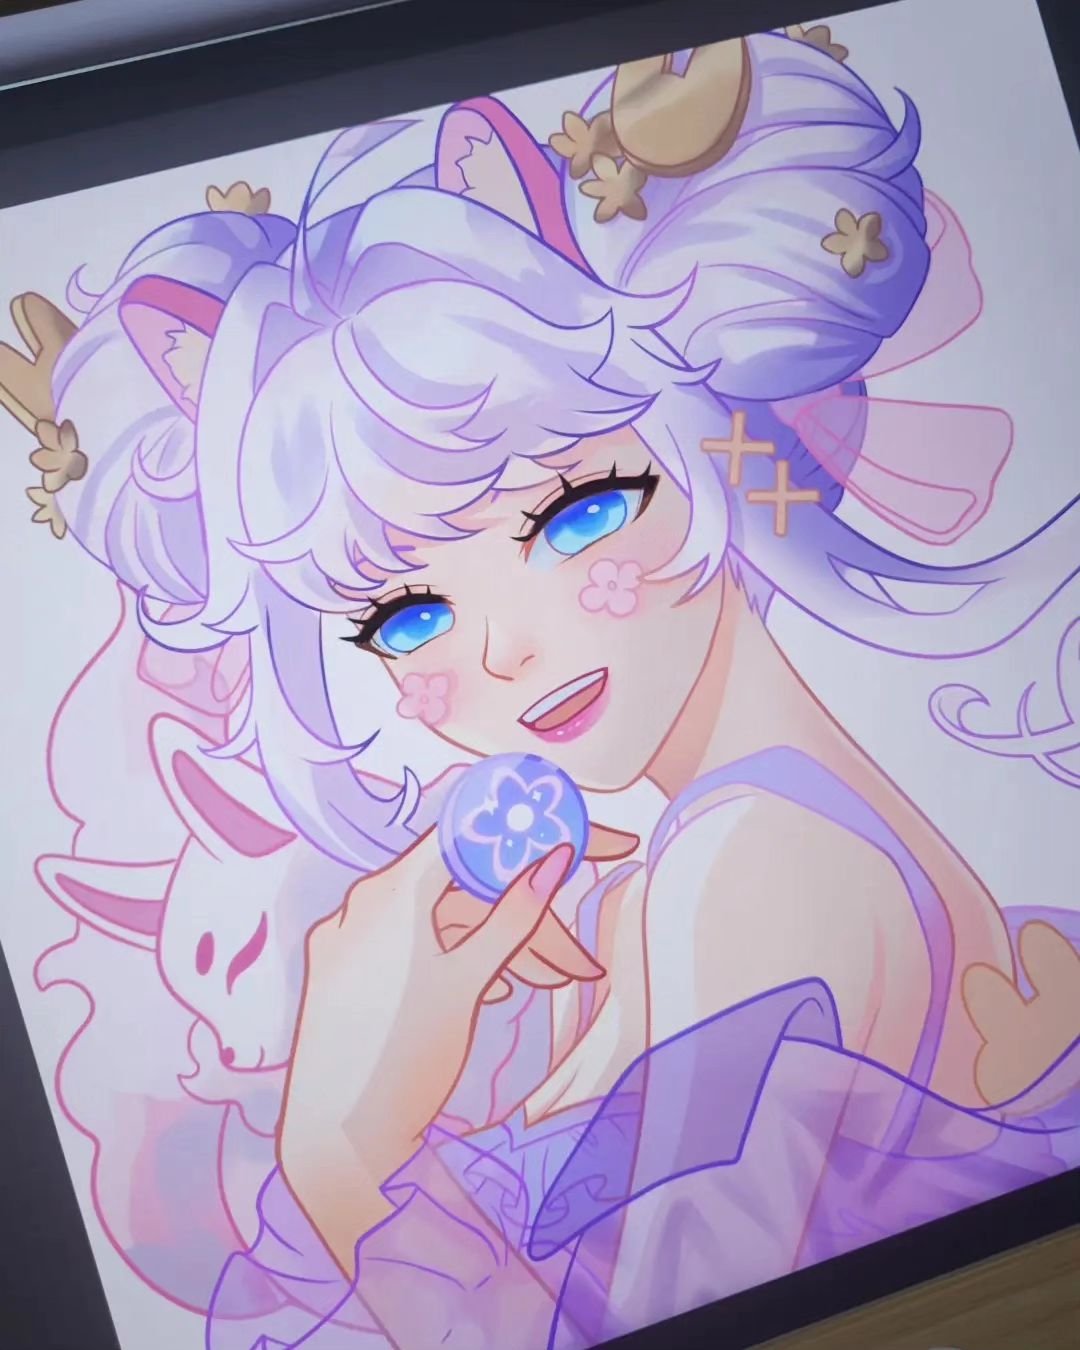 This is what I'm working on atm. I think it's really important to make my own originals too, not just fanarts✨️ So expect both kinds of content in my page 💜

#oc #illustration #drawing #animegirl #animestyle #procreate #procreateart